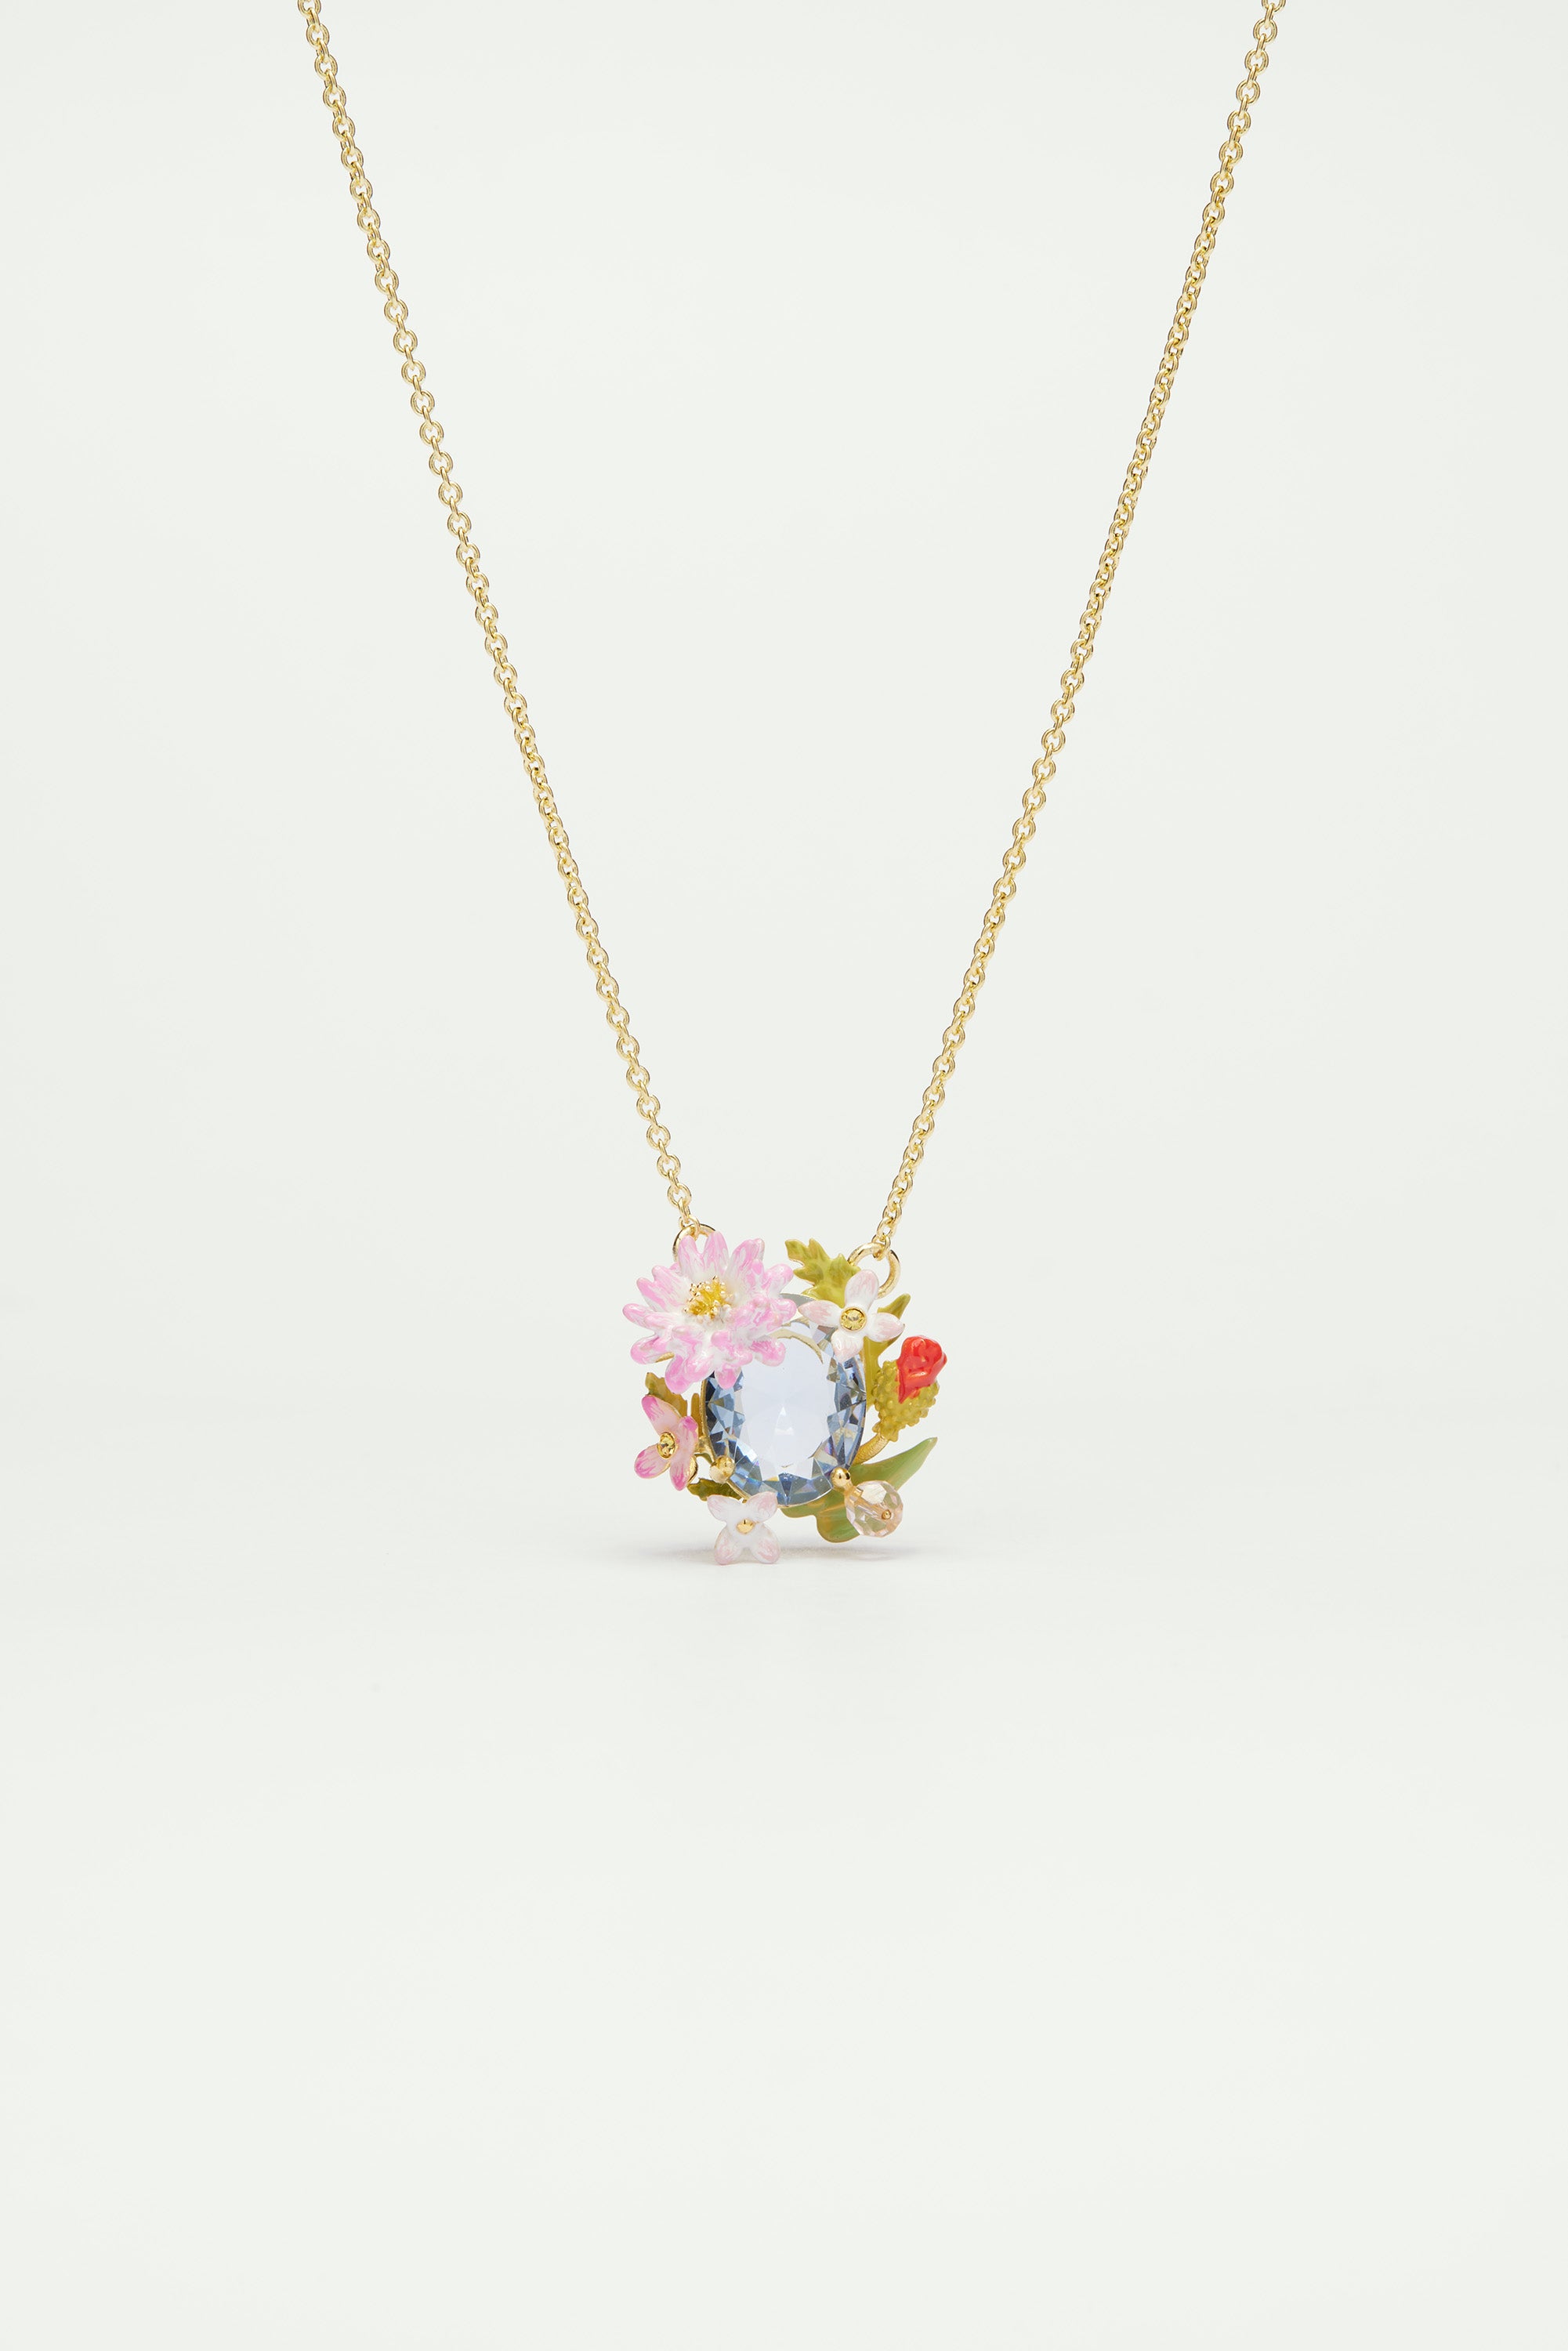 Poppy, daisy and blue cut glass stone pendant necklace